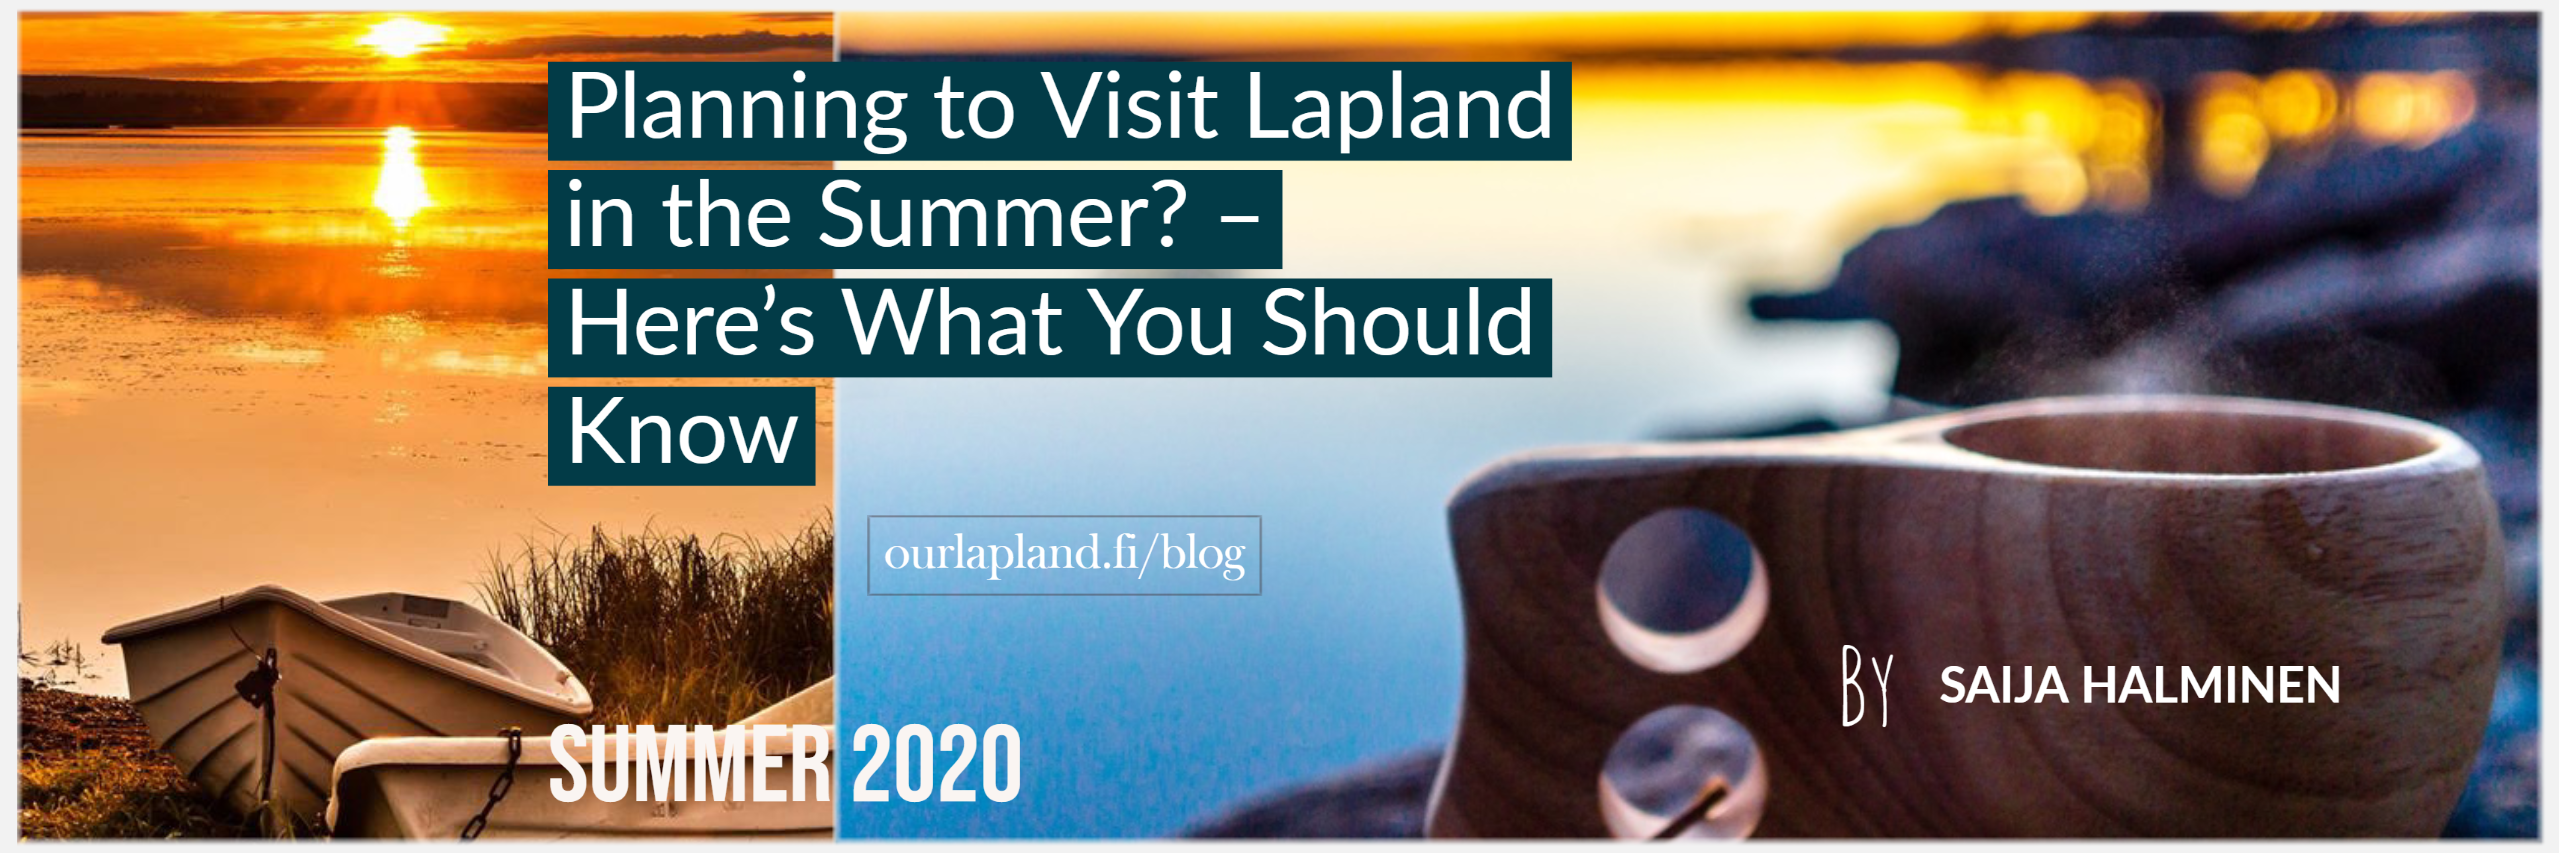 Planning to Visit Lapland in the Summer_ – Here’s What You Should Know - summer 2020